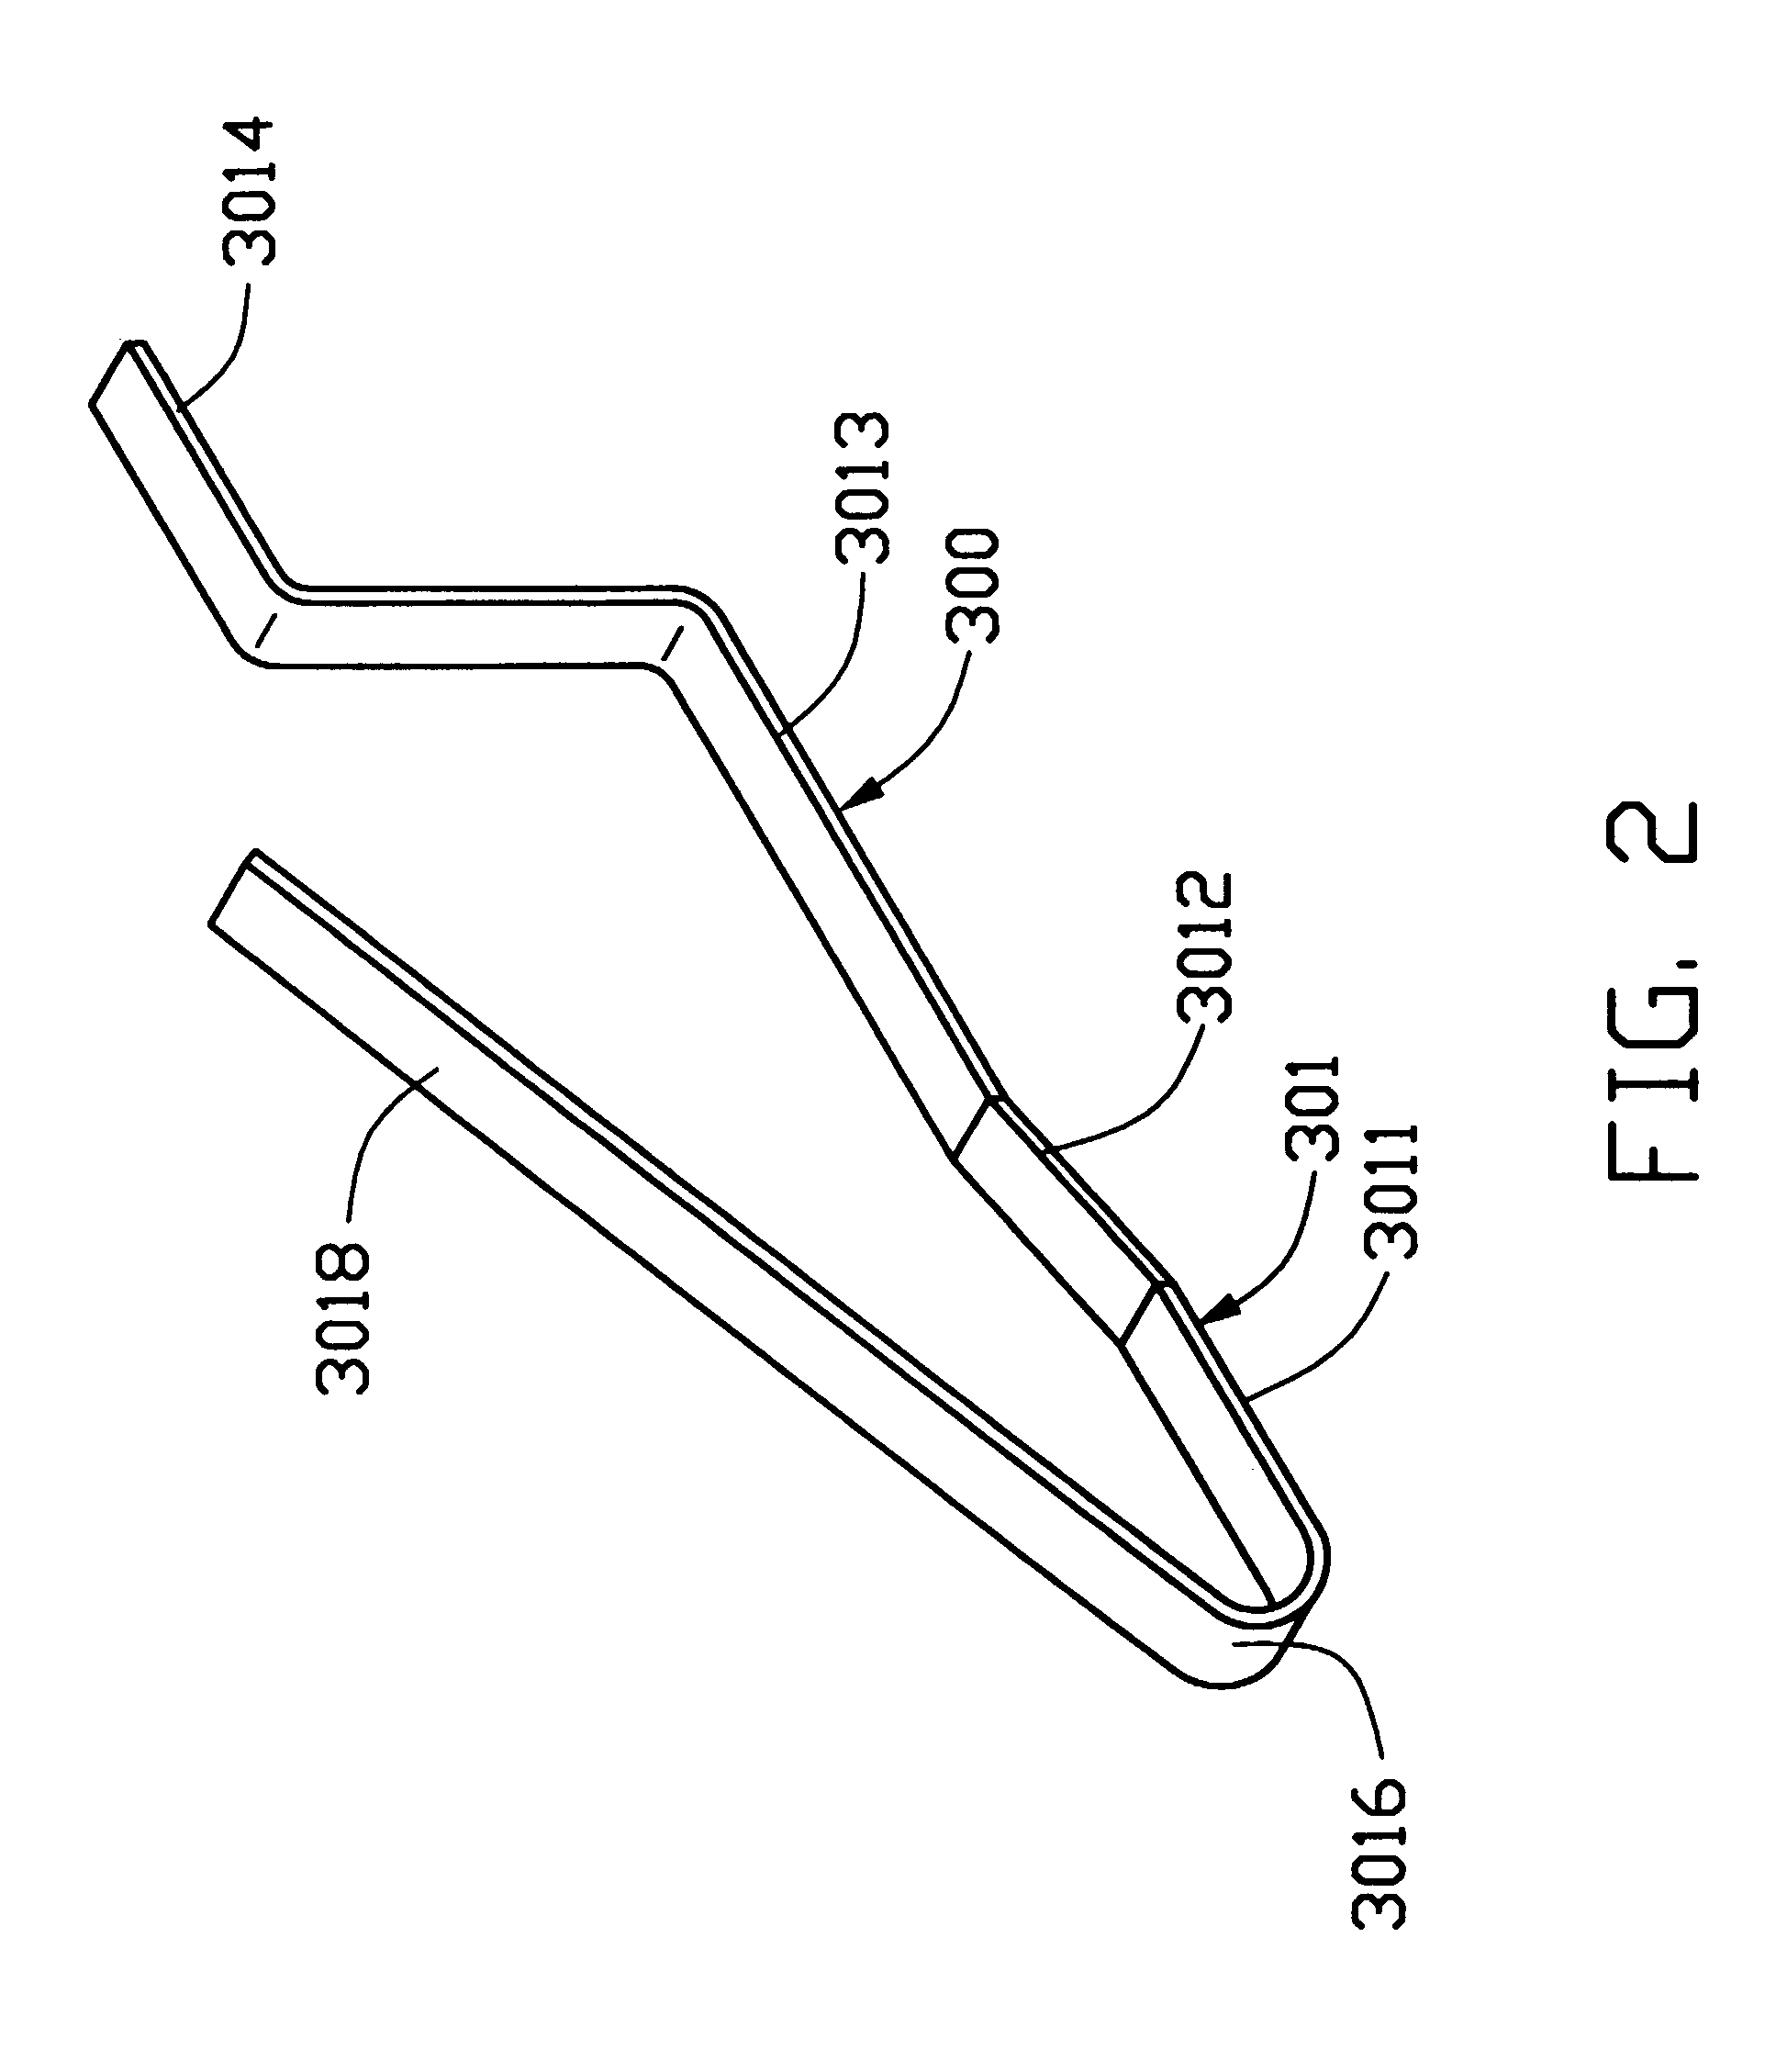 Low profile electrical connector assembly with low insertion force